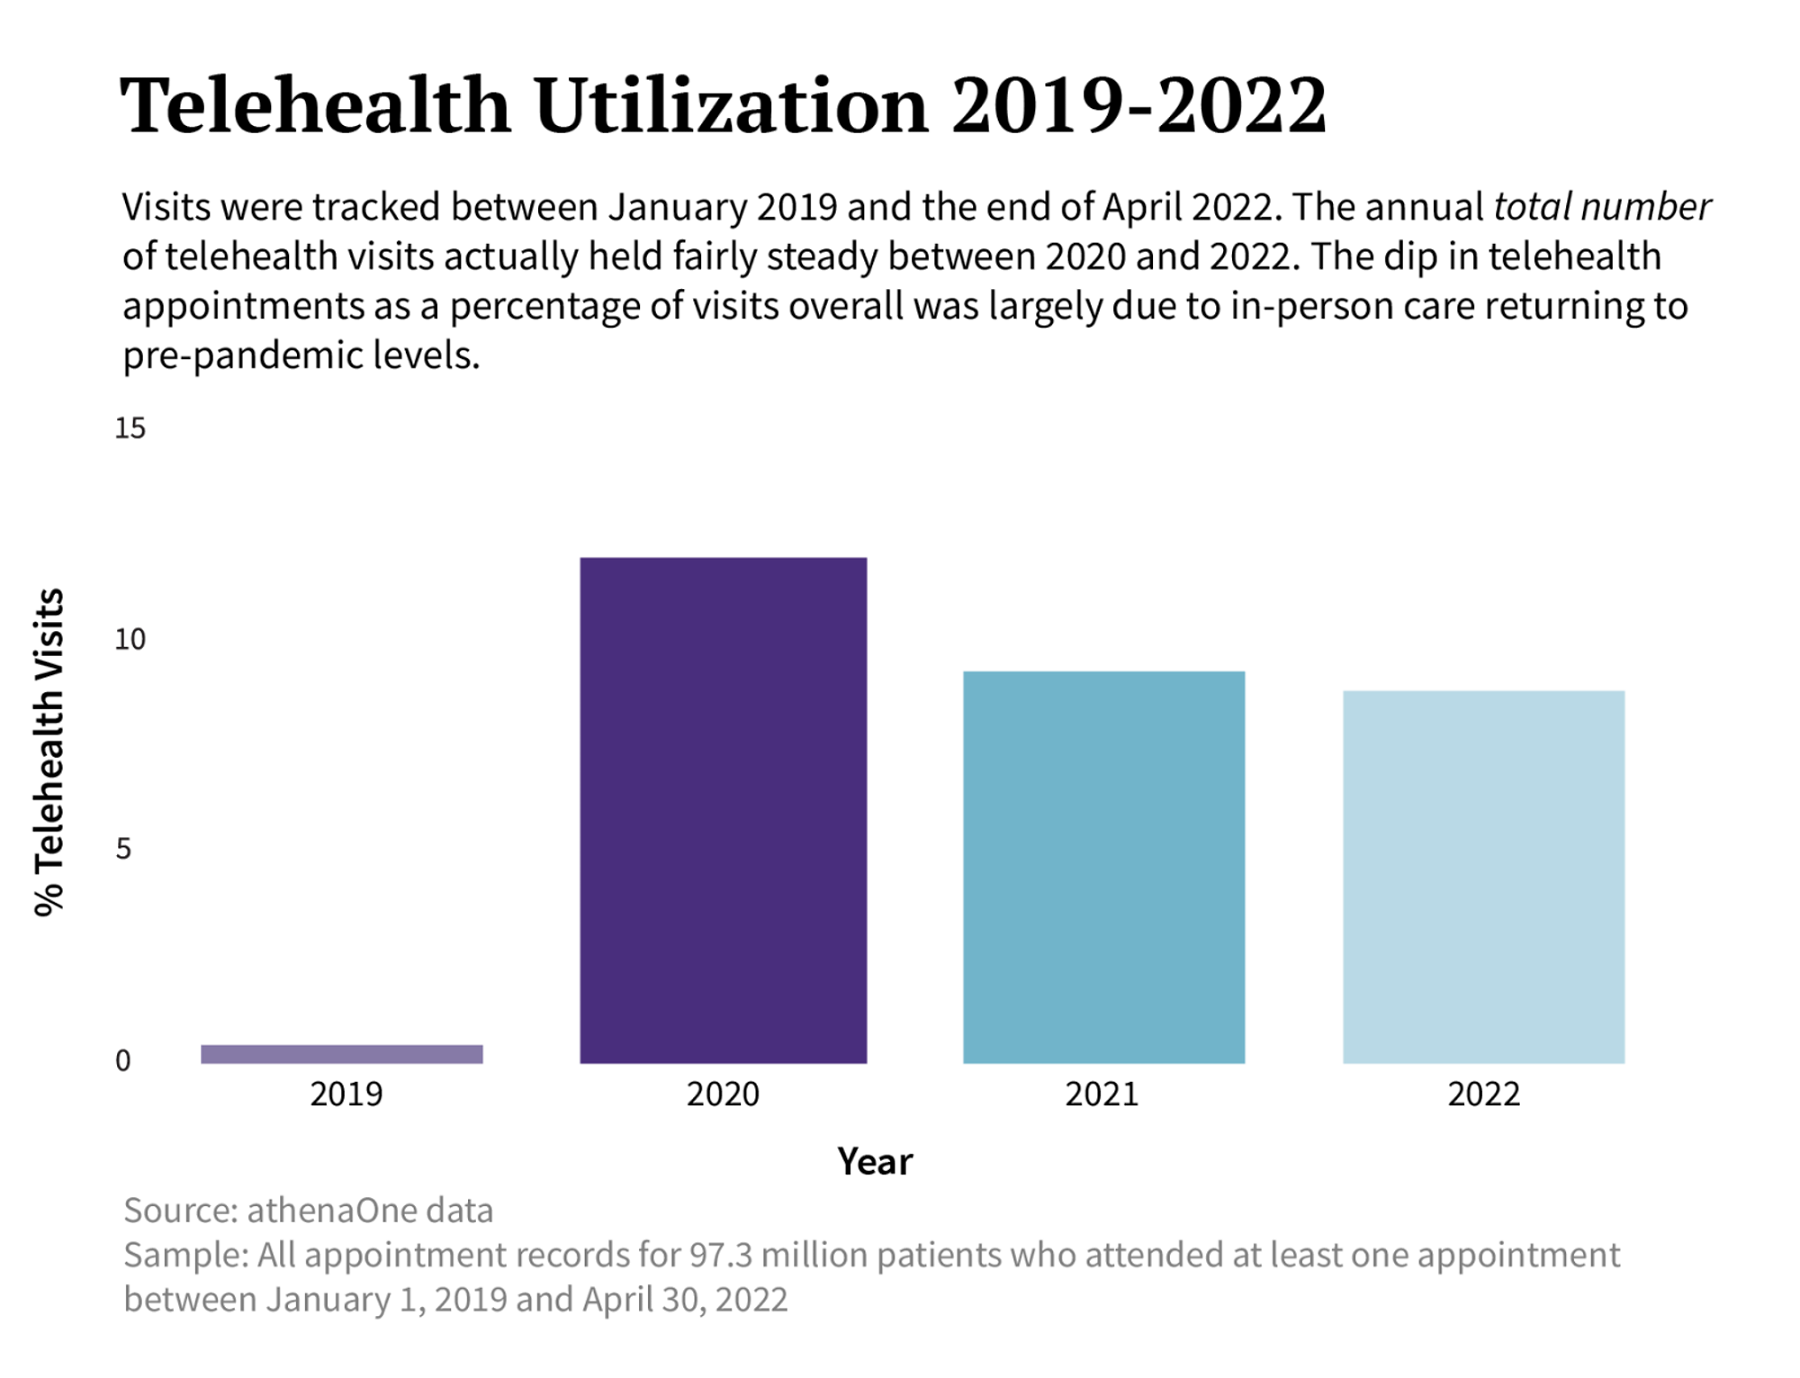 Telehealth begins to fulfill its promise | athenahealth